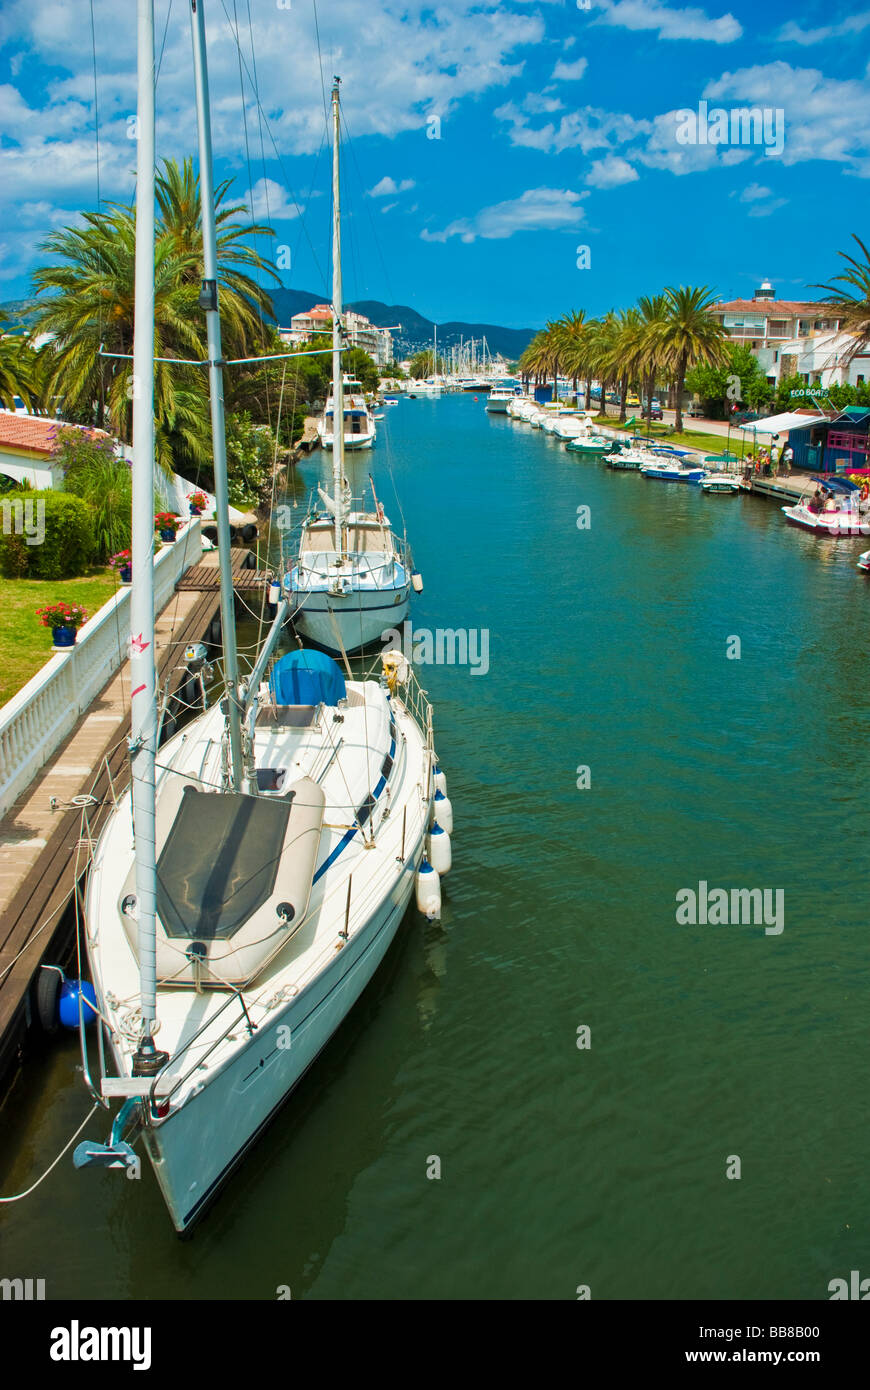 Sailing yachts and boats in a canal at Empuriabrava village with ...